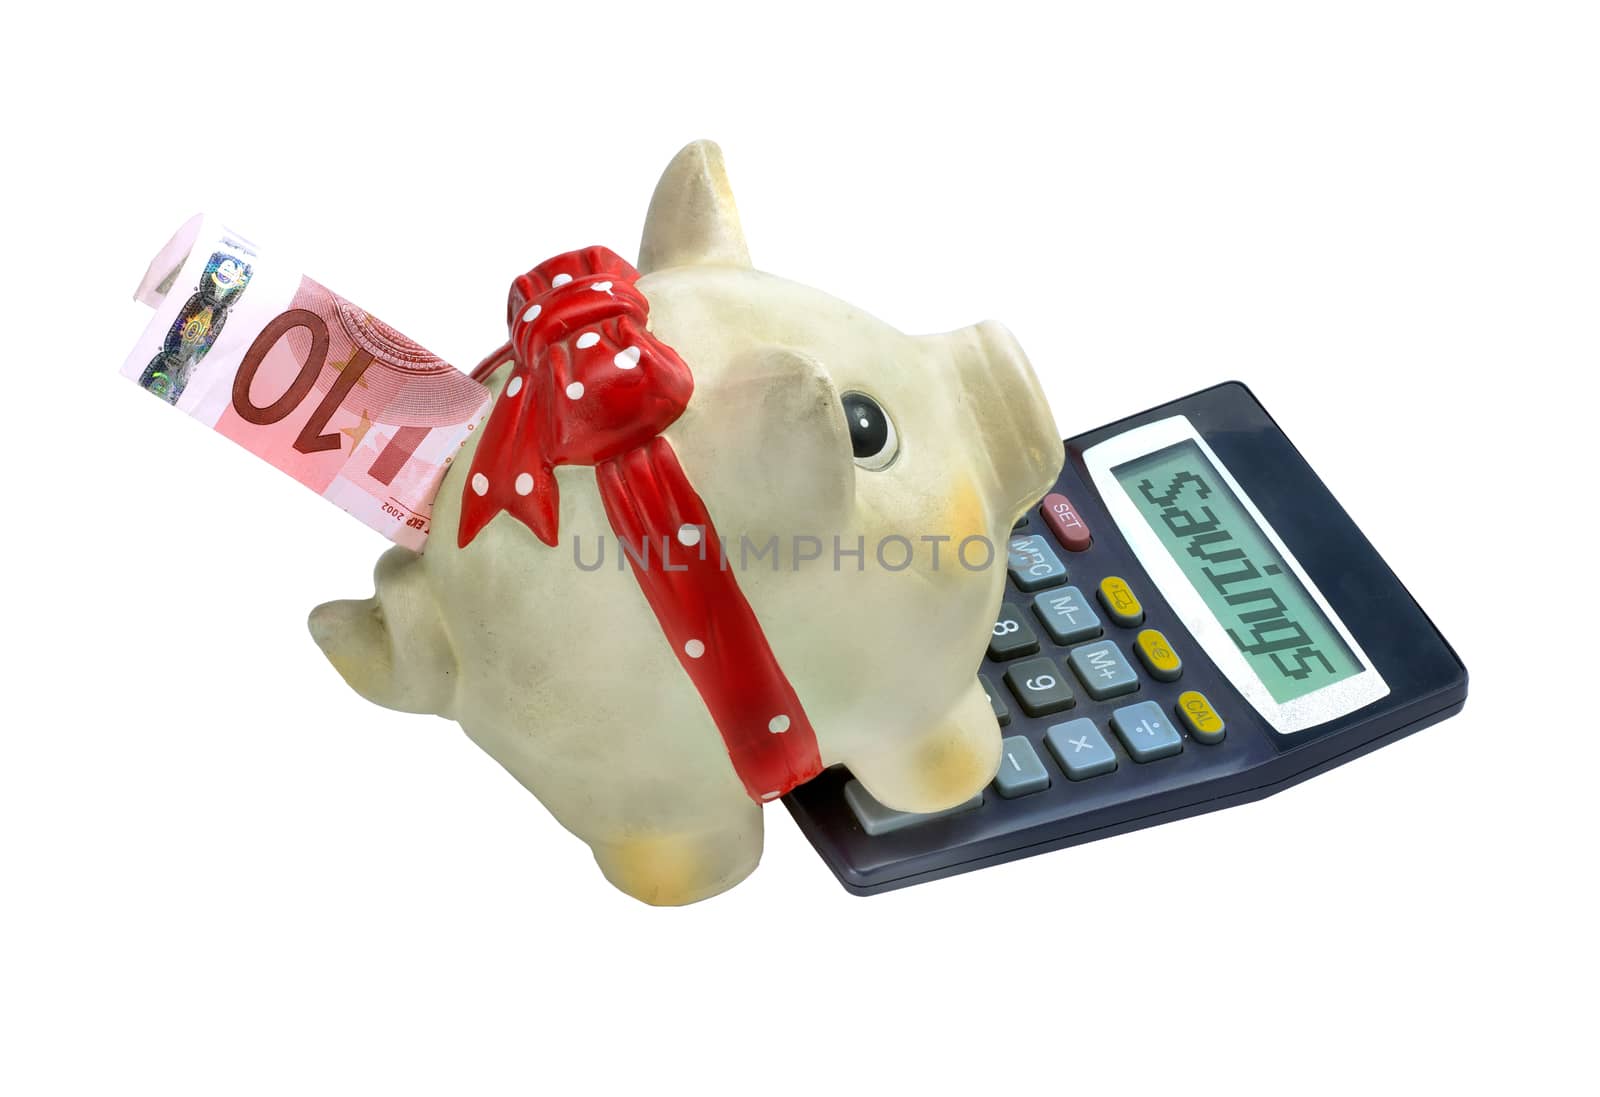 Piggy bank with calculator money box style, isolated on white background